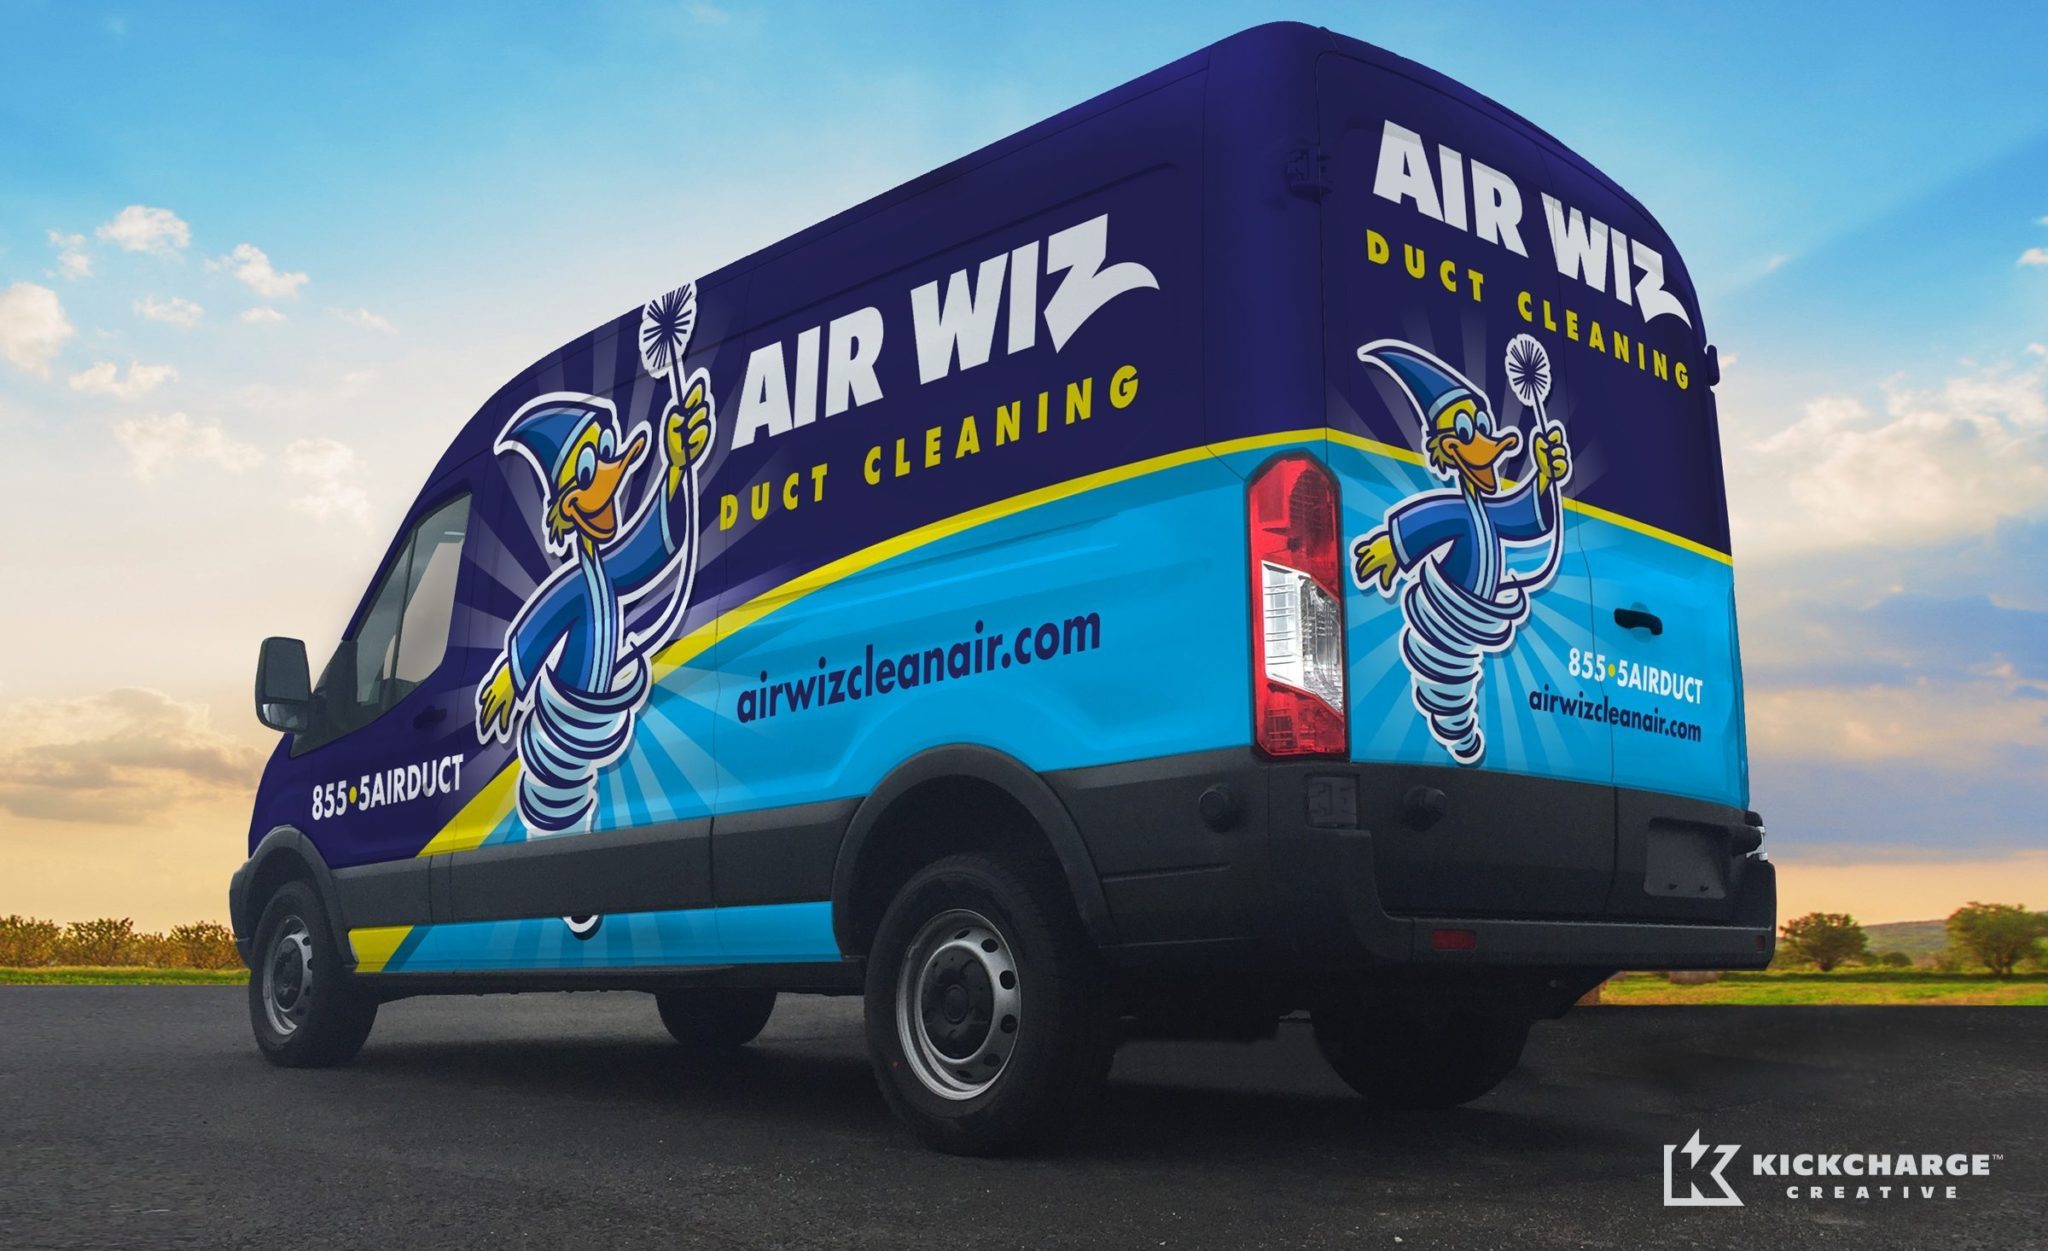 The best vehicle wraps use simple, easy-to-read graphics, as this wrap for Air Wiz Duct Cleaning shows.